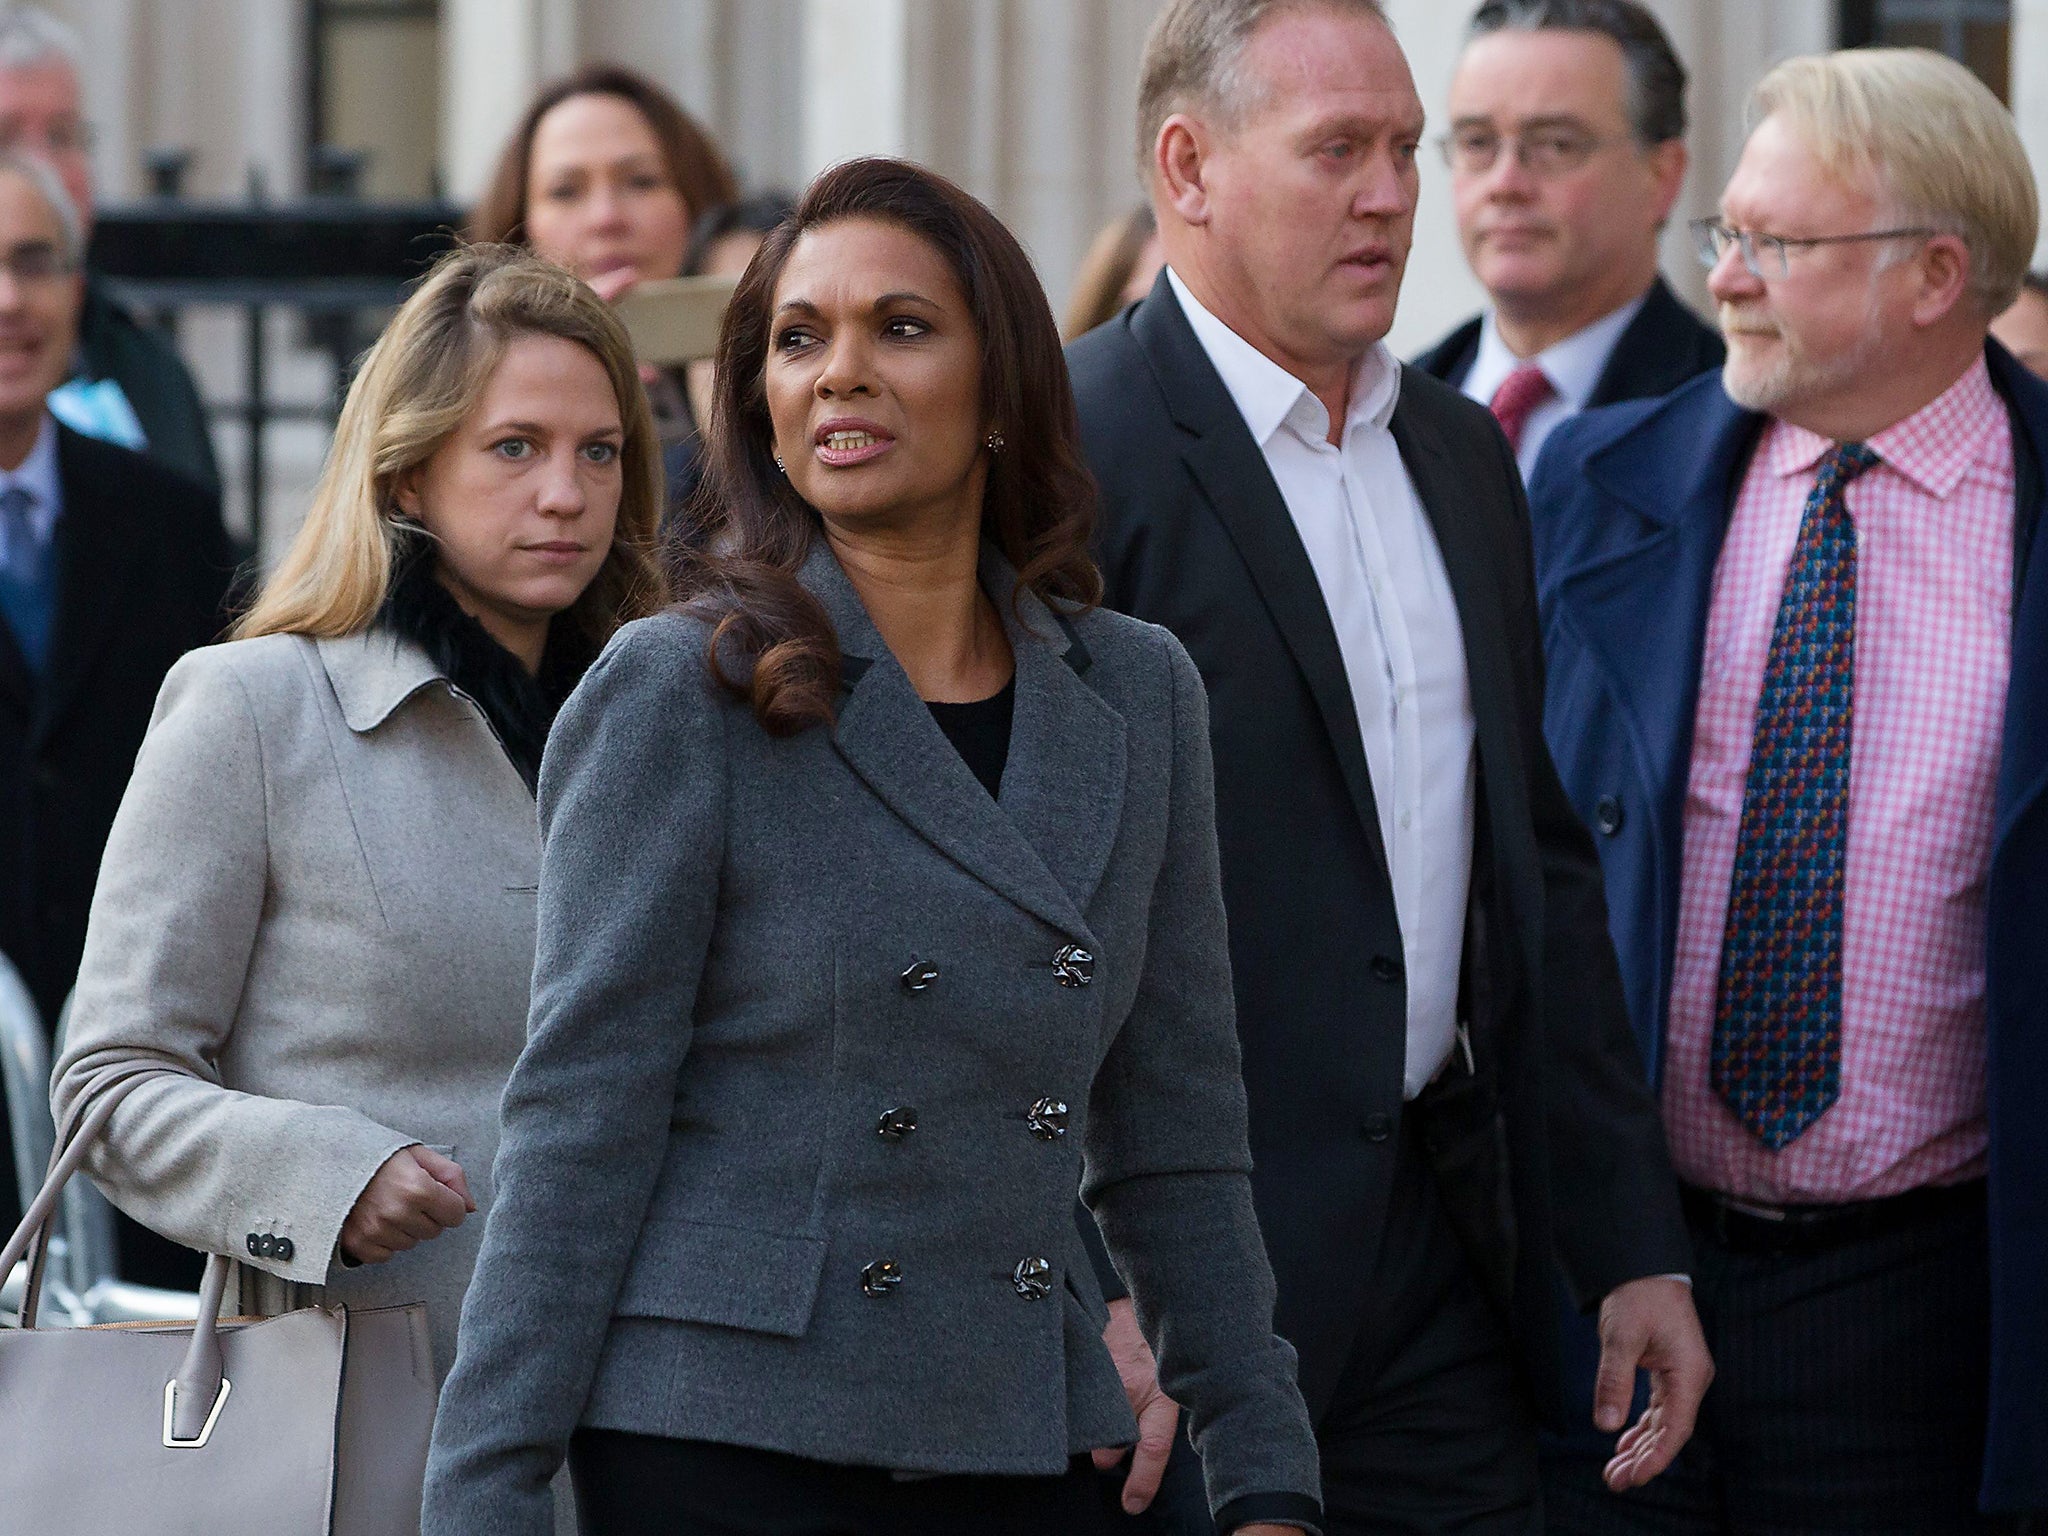 Remain campainger Gina Miller says she has received death threats over the Brexit challenge